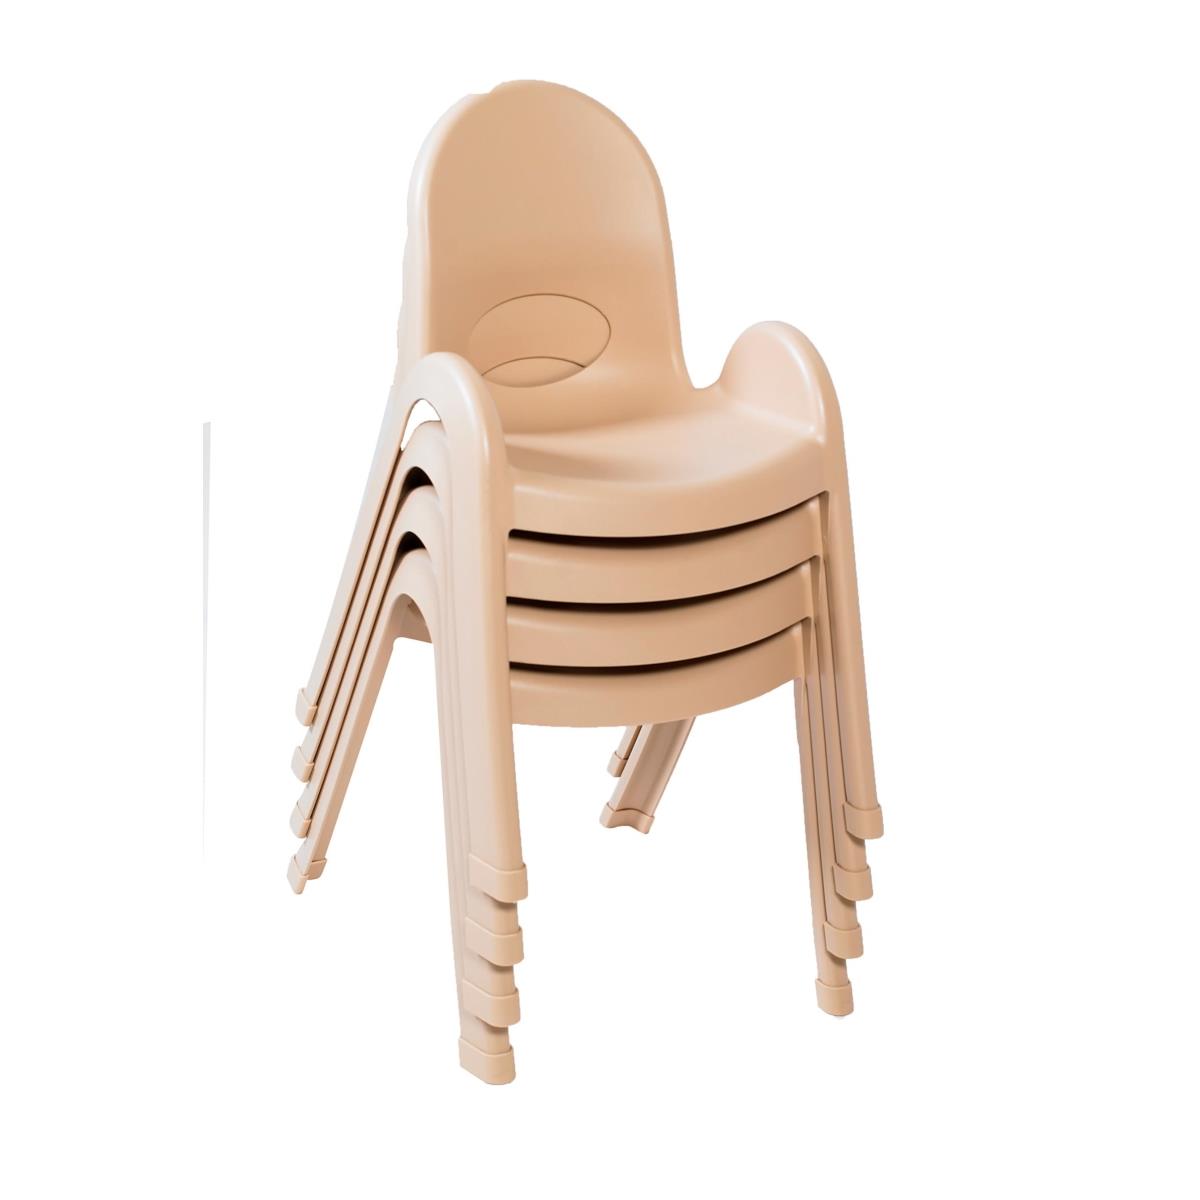 Ab7713nt4 13 In. Value Stack Child Chair, Natural Tan - Pack Of 4